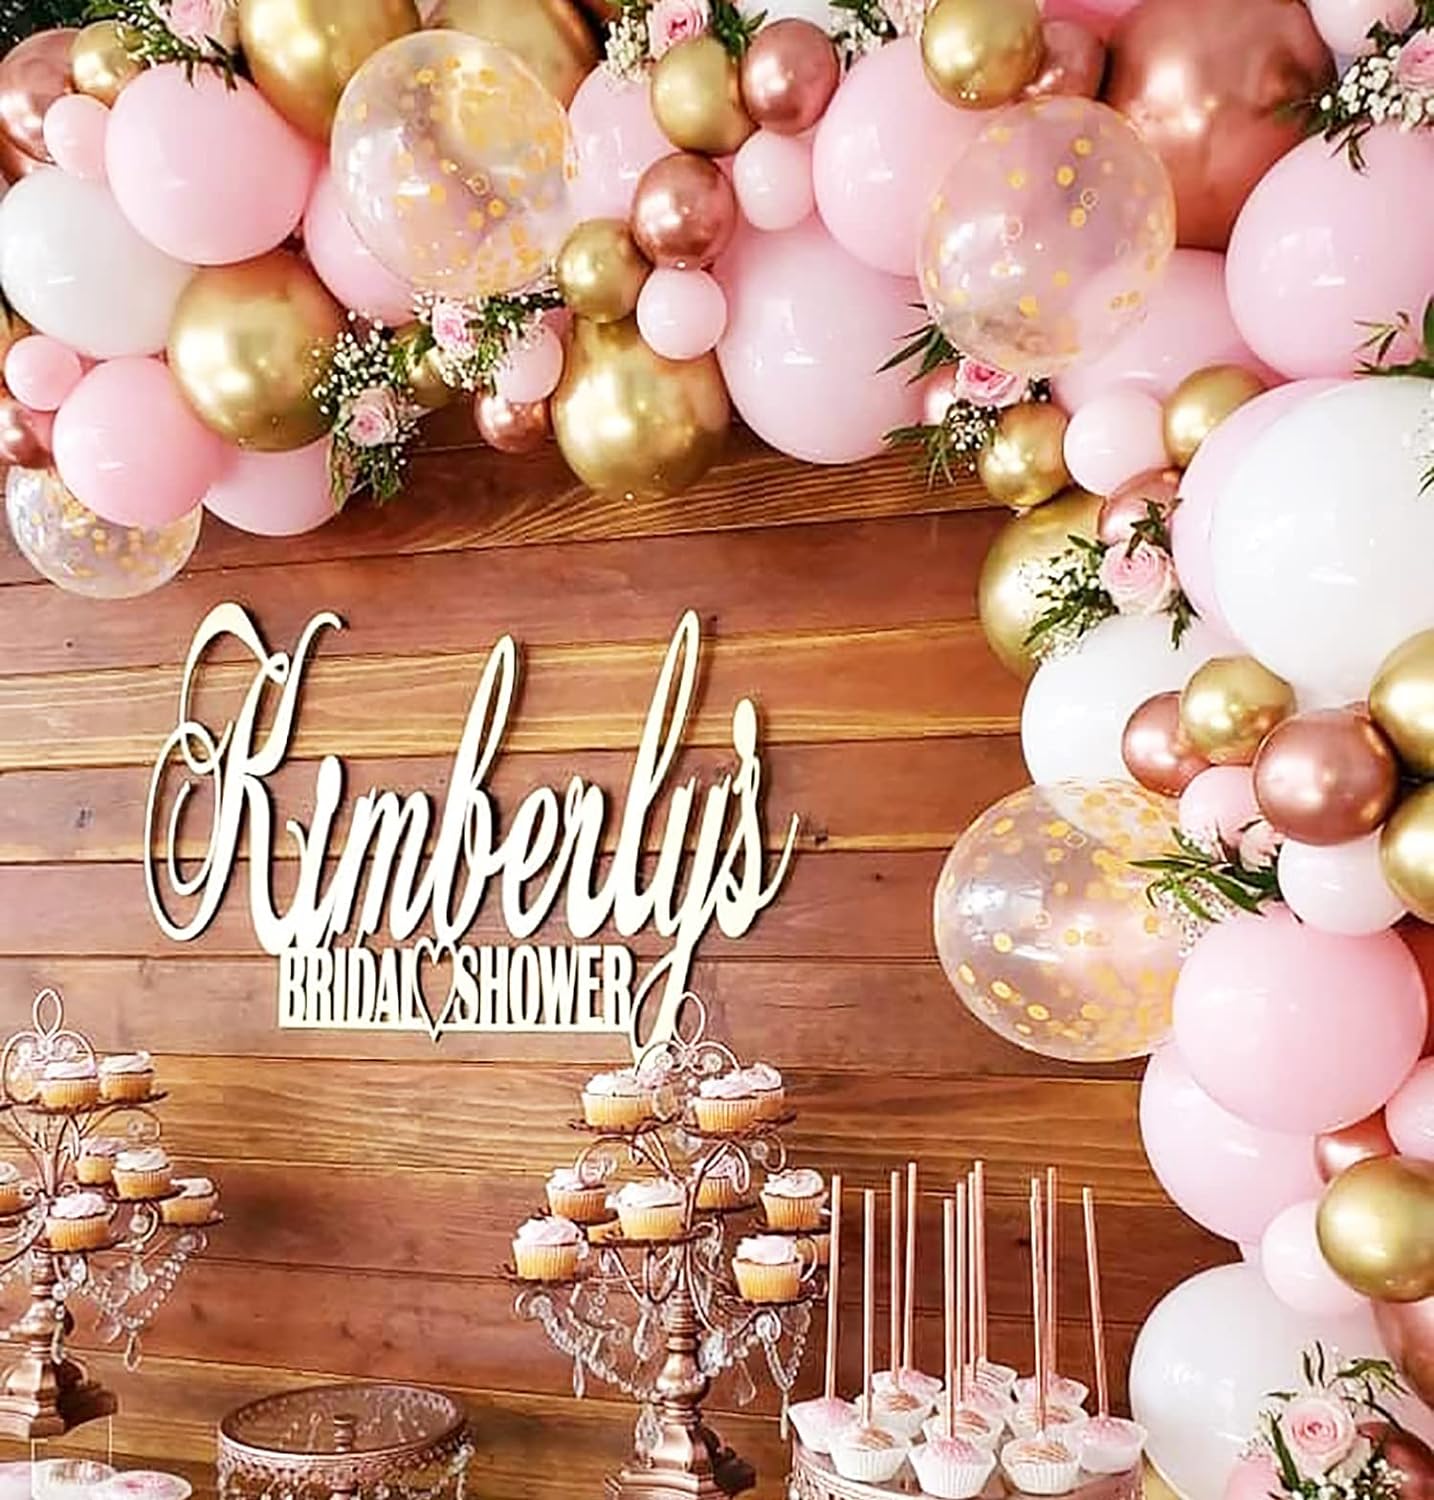 Rose Gold Pink White Balloon Garland Arch 160PCS with Confetti Balloons Baby Shower Mother&#x27;s Day Princess Birthday Engagement Bridal Shower Party Decoration (Pink White Rose Gold)